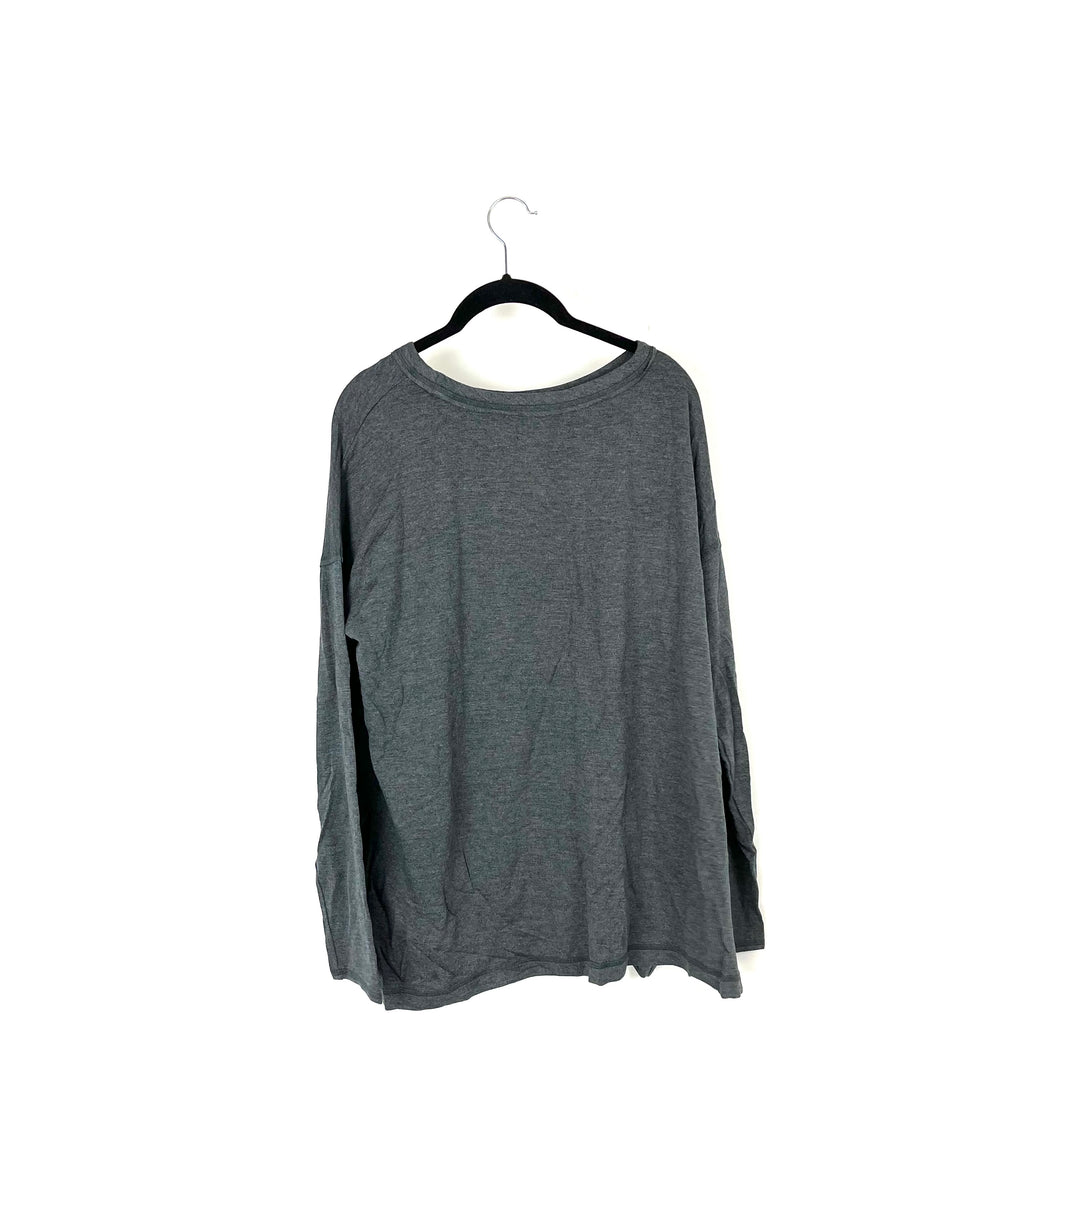 Comfy Grey Lounge Top - Size 6-8